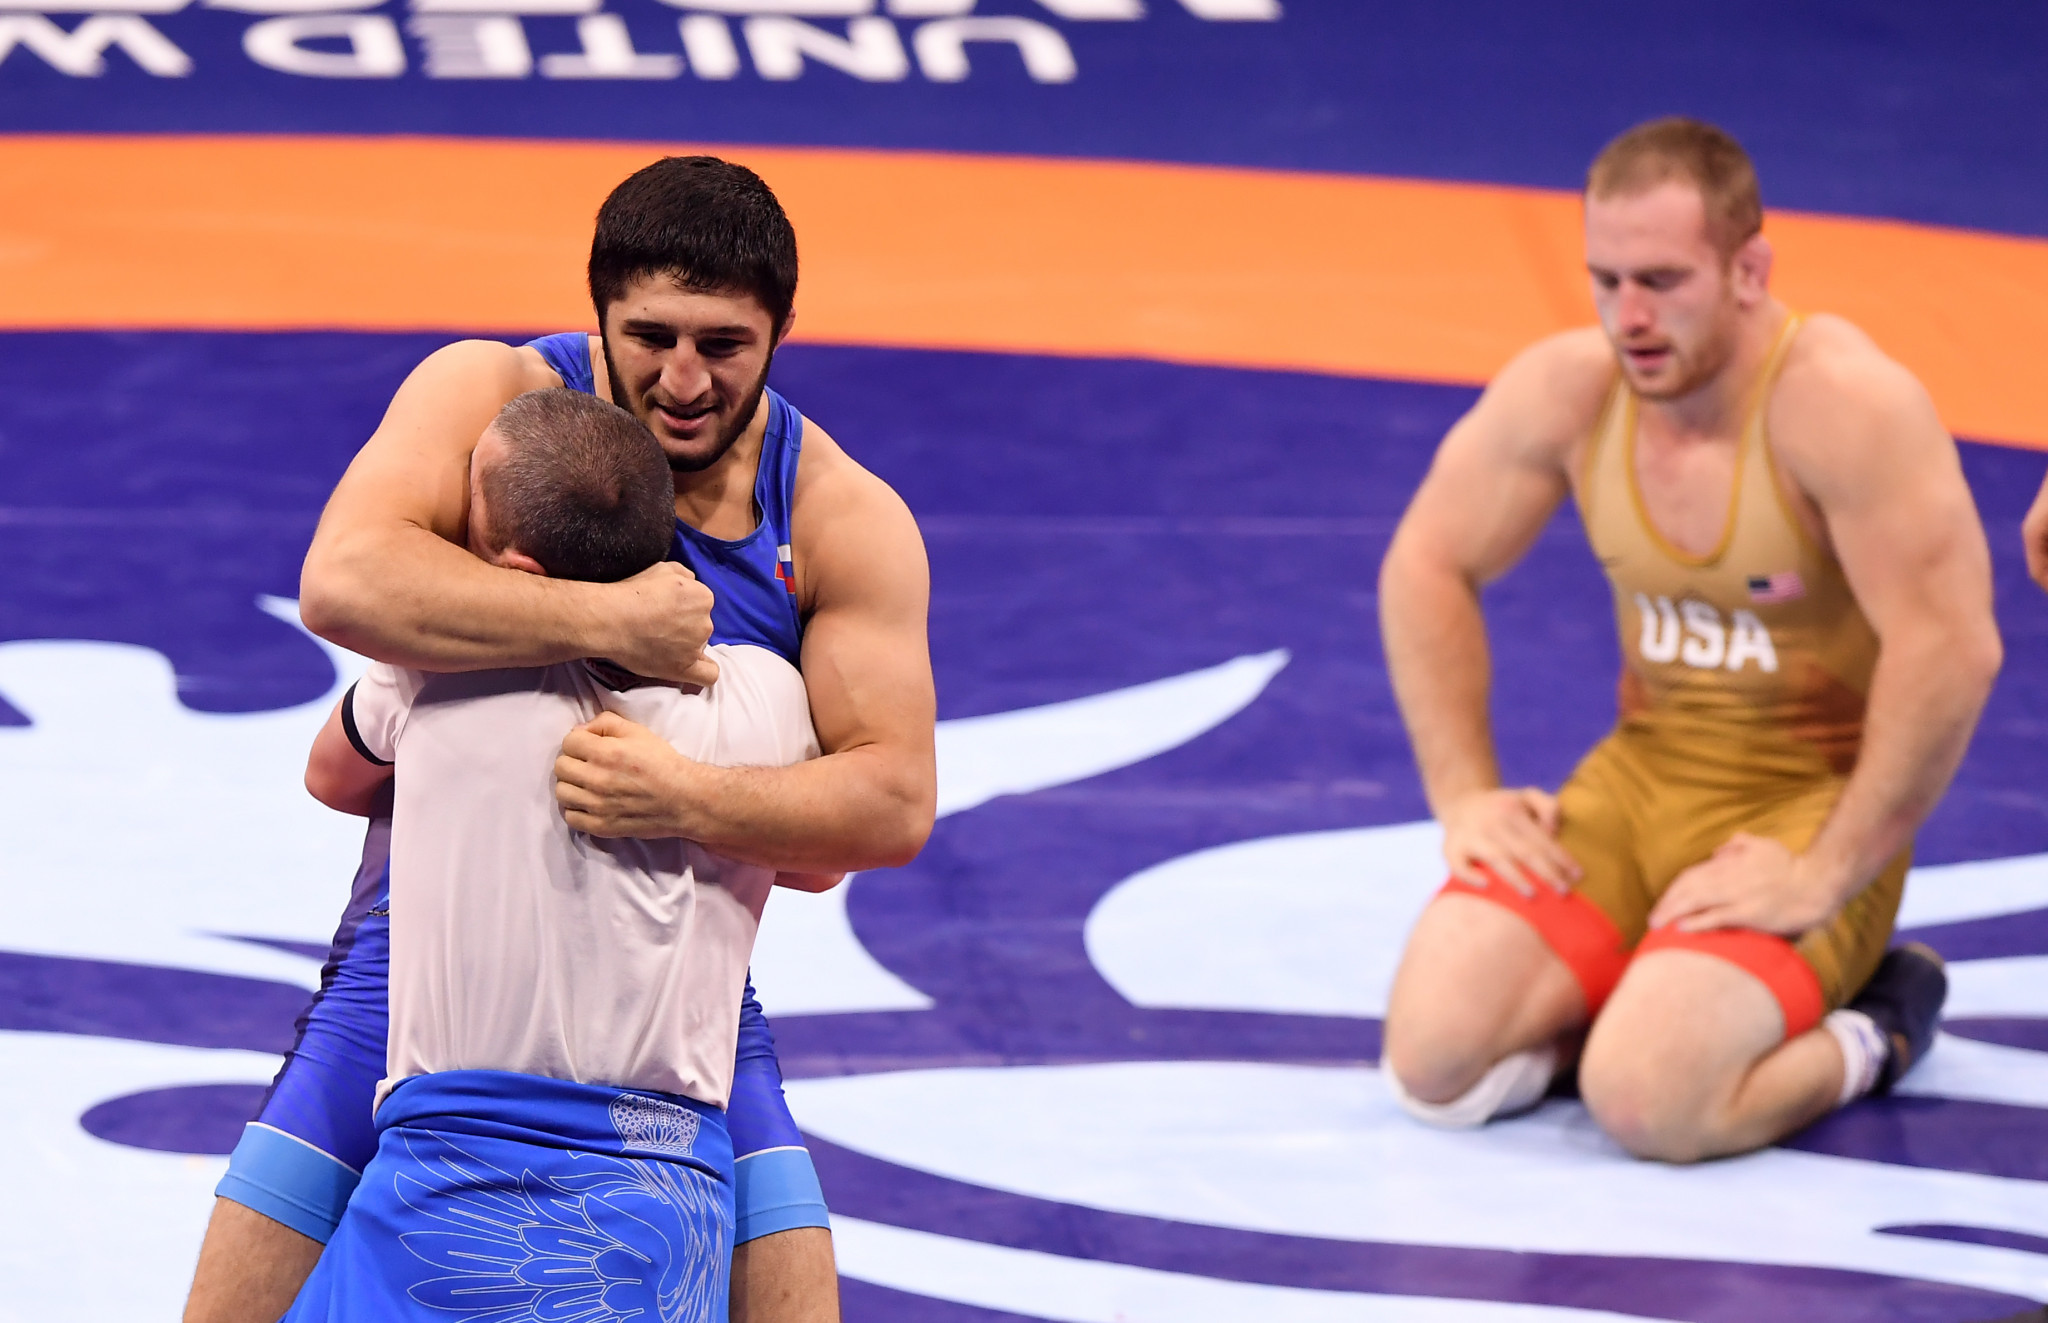 Abdulrashid Sadulaev won the 97kg freestyle final at the World Wrestling Championships against Kyle Snyder, in a tie dubbed "the rematch of the century" ©Getty Images